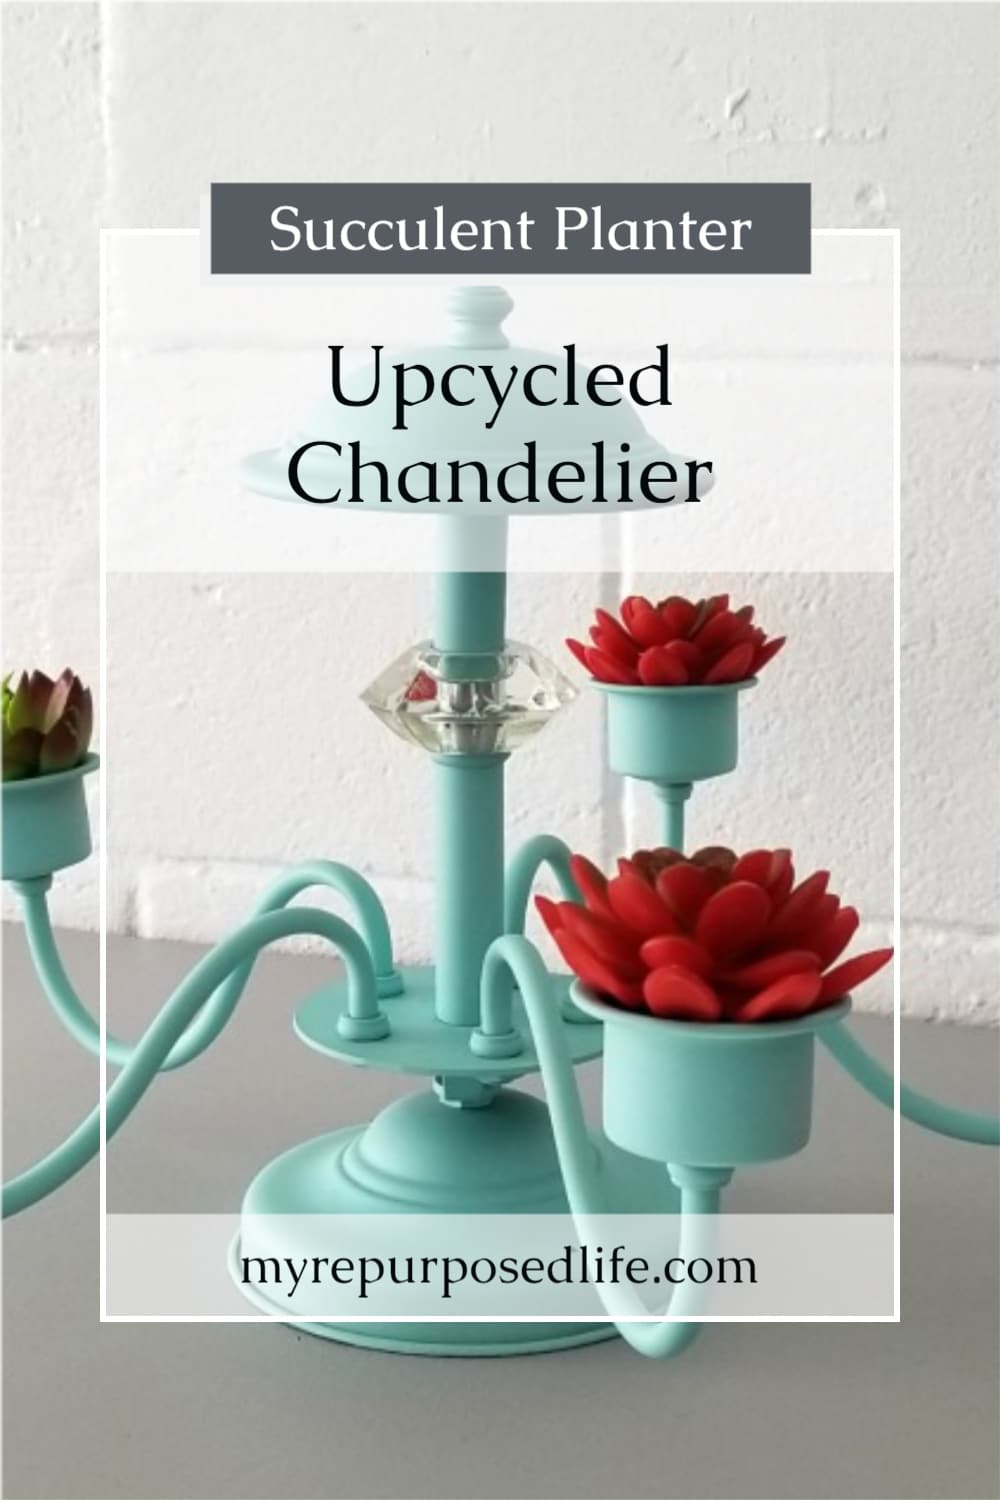 How to make a repurposed chandelier succulent planter that is interchangeable from hanging to setting on a table as a centerpiece. You could easily change this out with candles or potted plants. Spray painting a brass chandelier really gives you so many options to match your decor. #MyRepurposedLife #repurposed #chandelier #succulent #planter via @repurposedlife